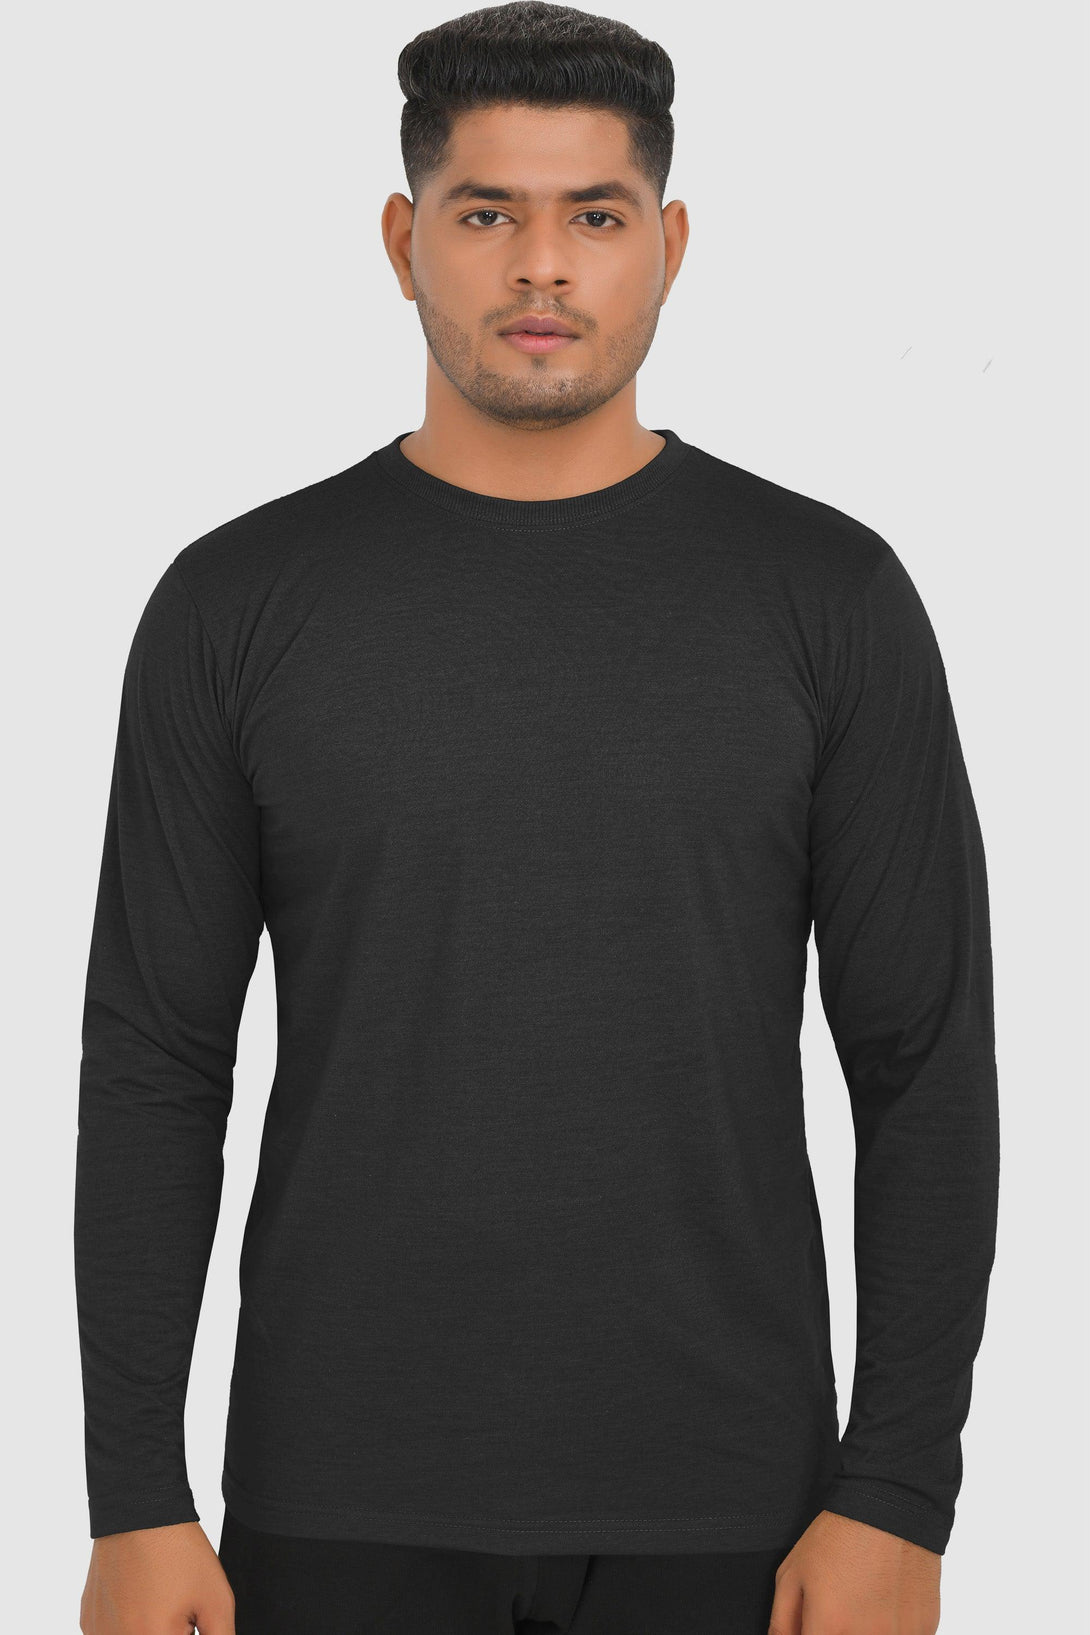 Long Sleeve Round Neck T-Shirts | CHARCOAL - FTS